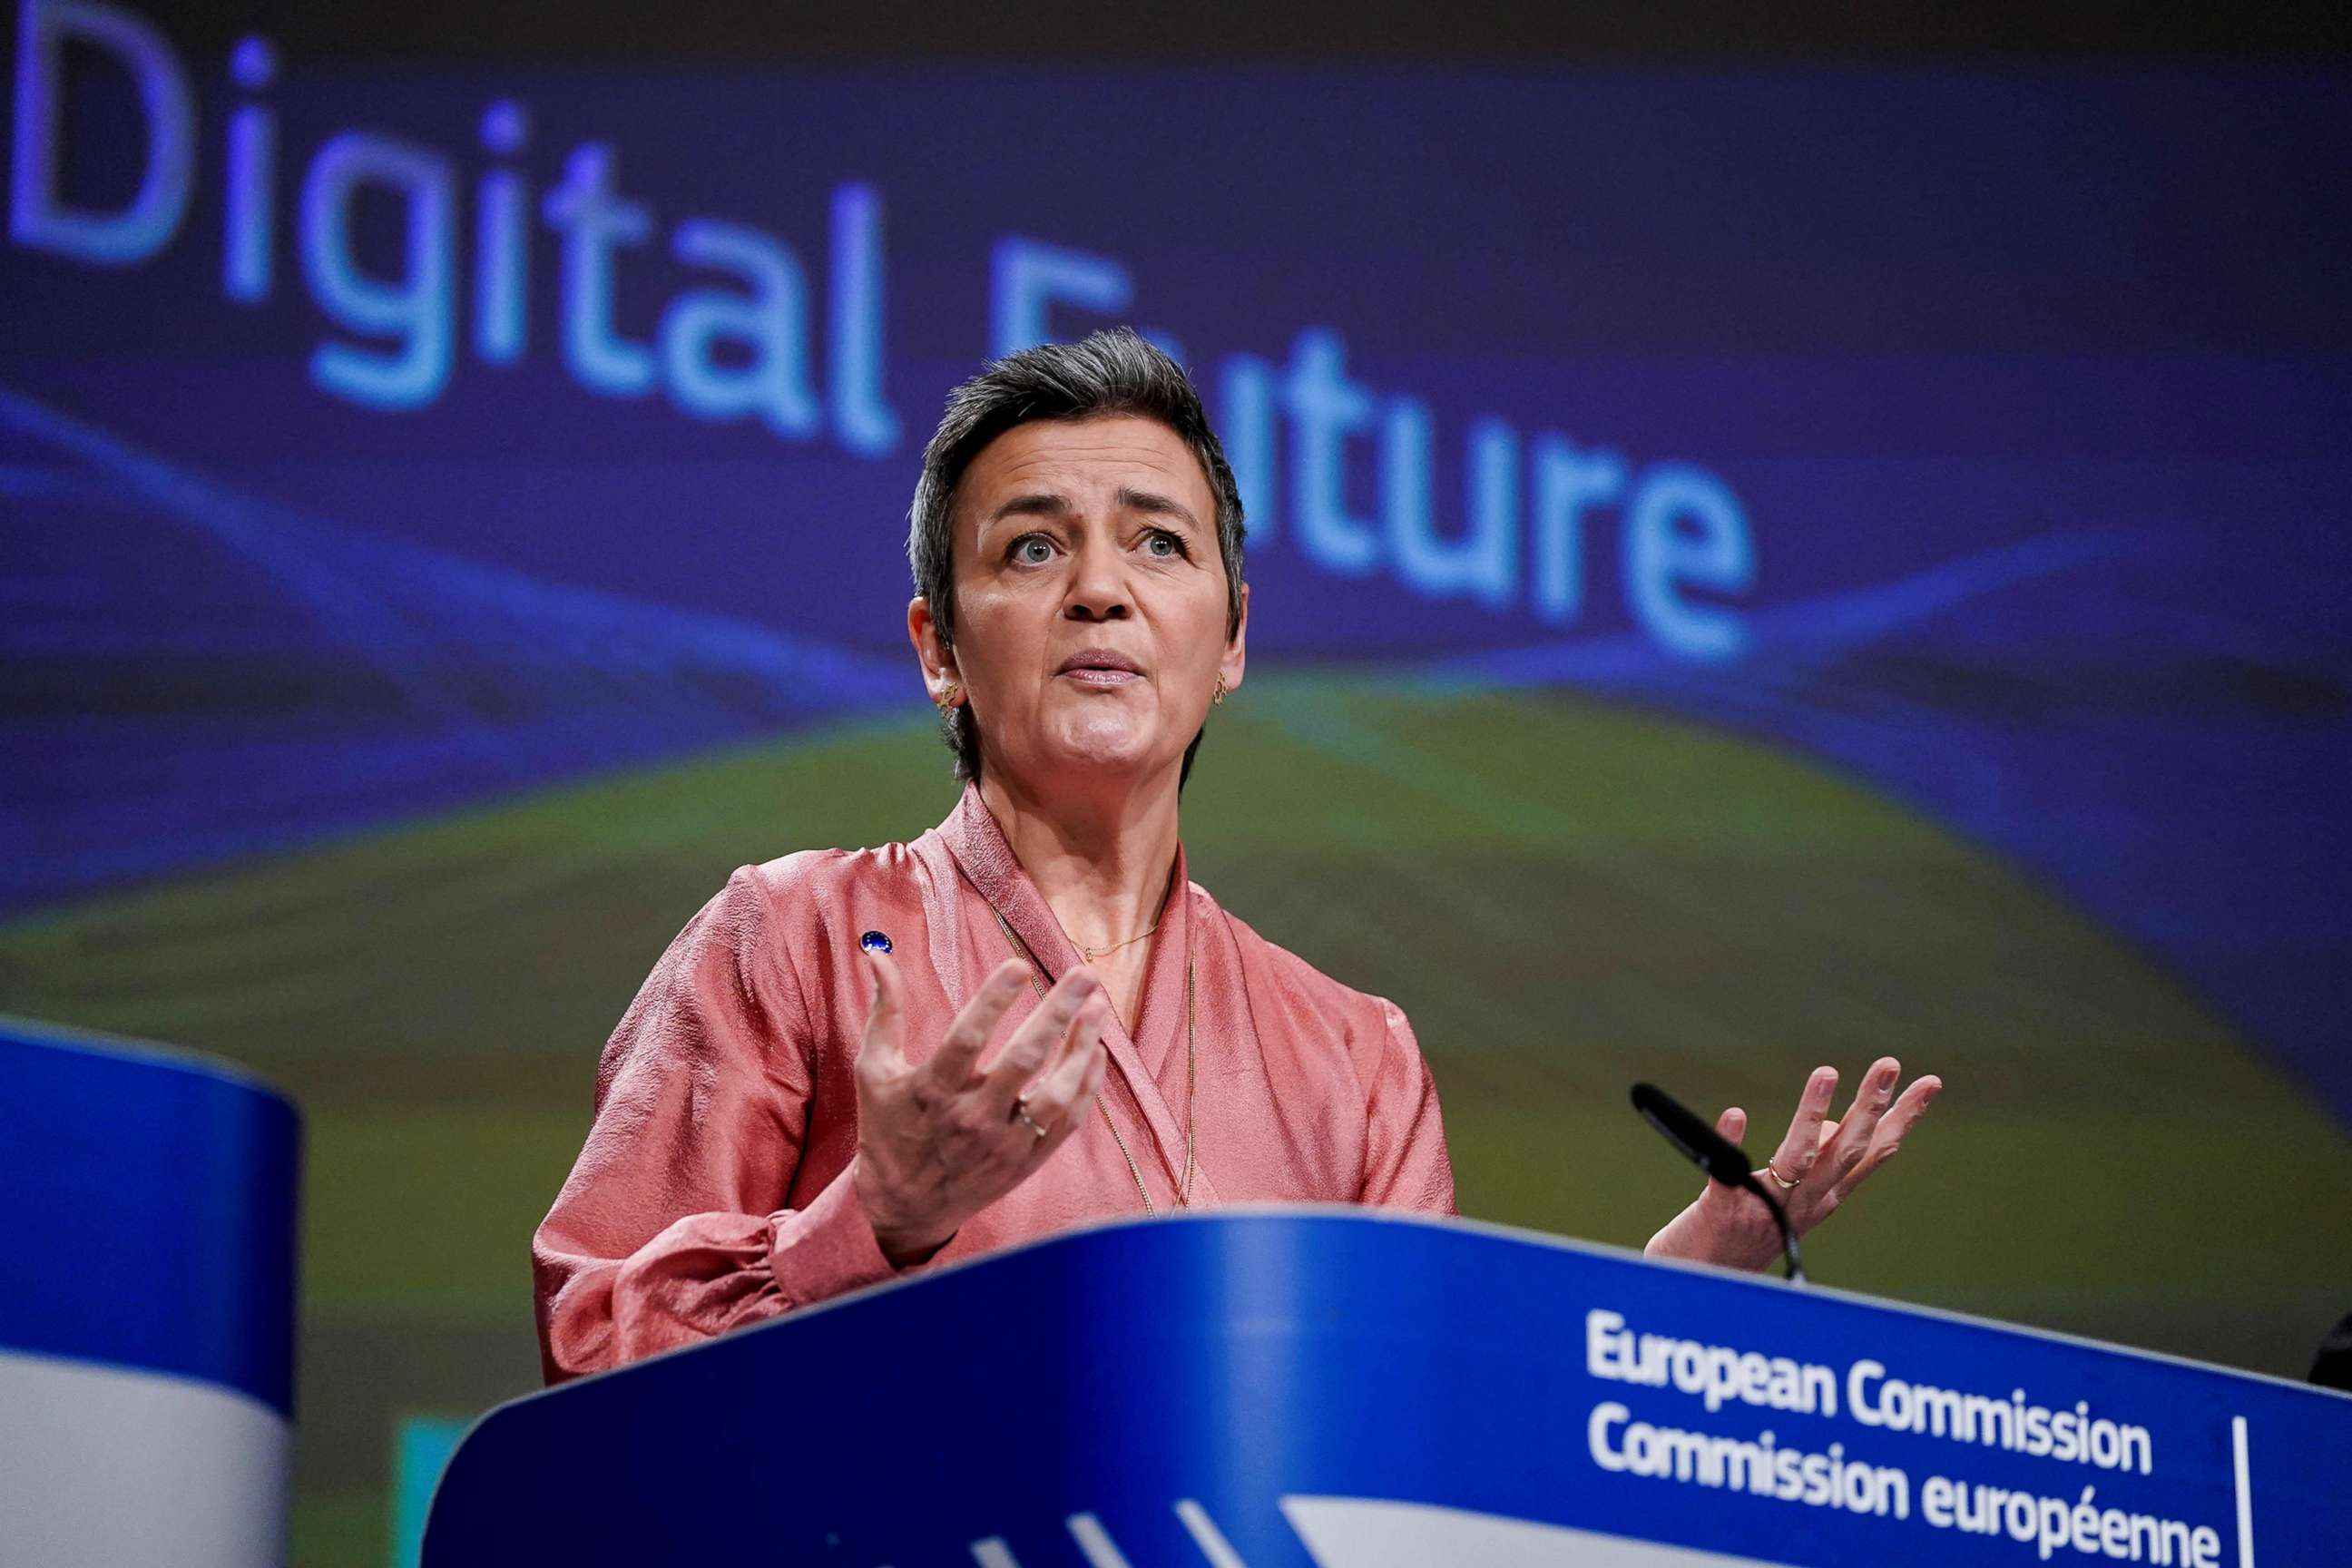 PHOTO: European Commission Executive Vice-President Margrethe Vestager addresses a press conference on Artificial Intelligence (AI) at the European Commission headquarters at the Berlaymont building in Brussels, Feb. 19, 2020.